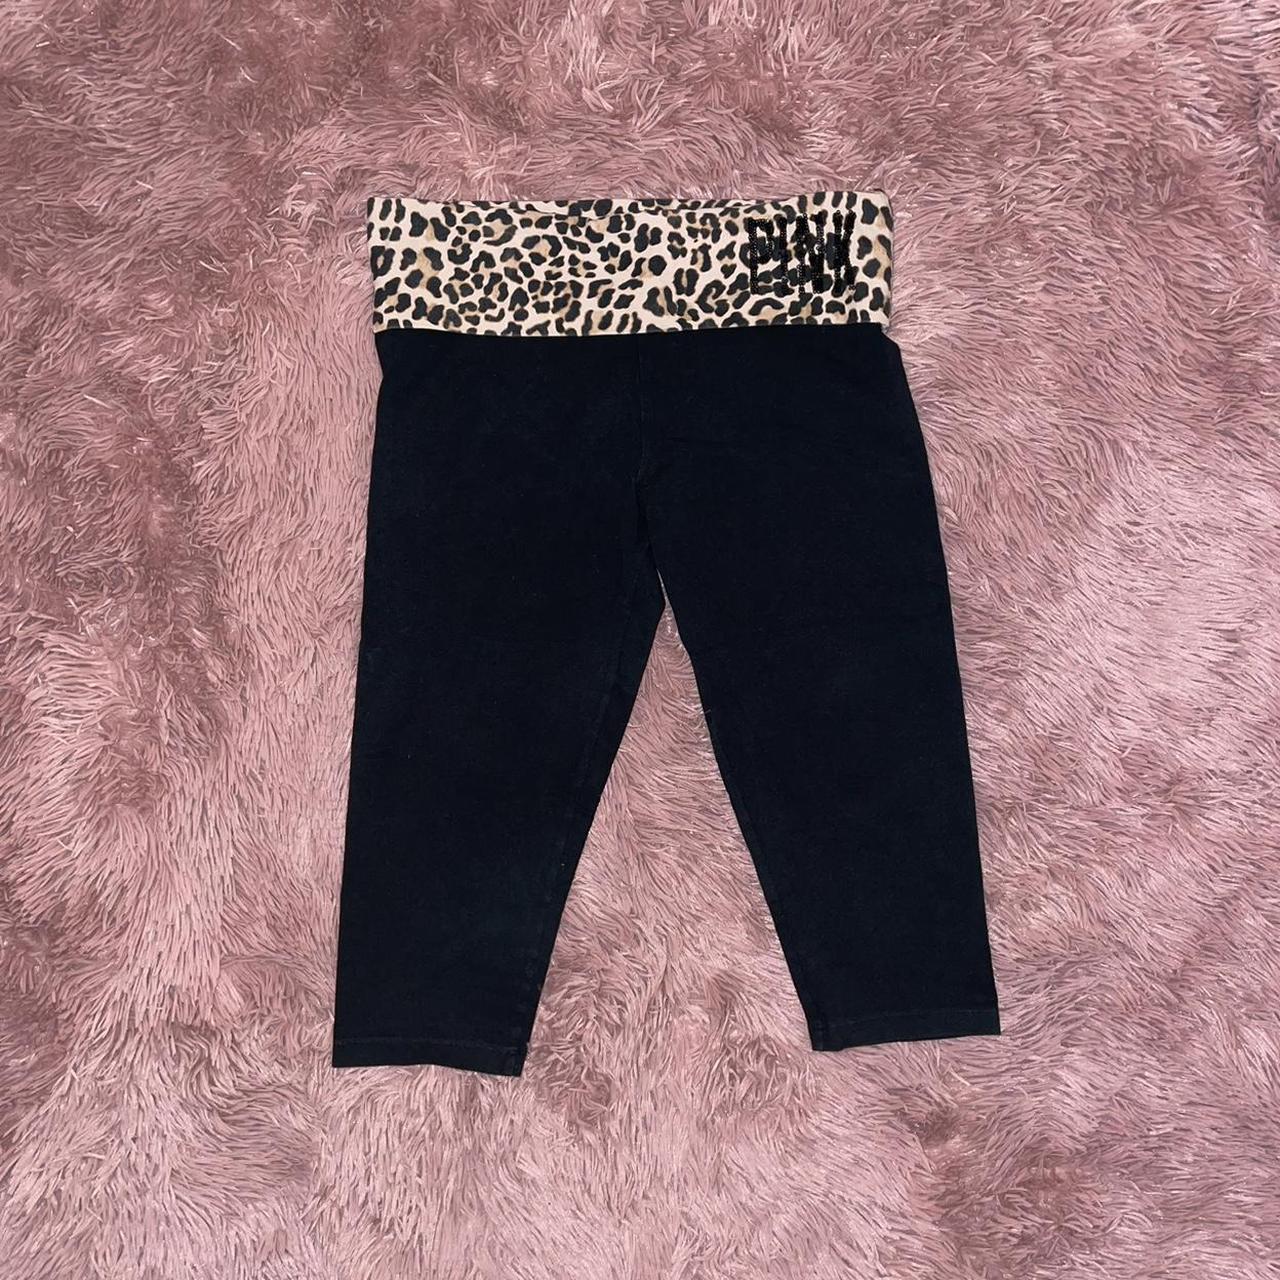 Pink A Roege Hove leggings. Purchased from SSENSE - Depop